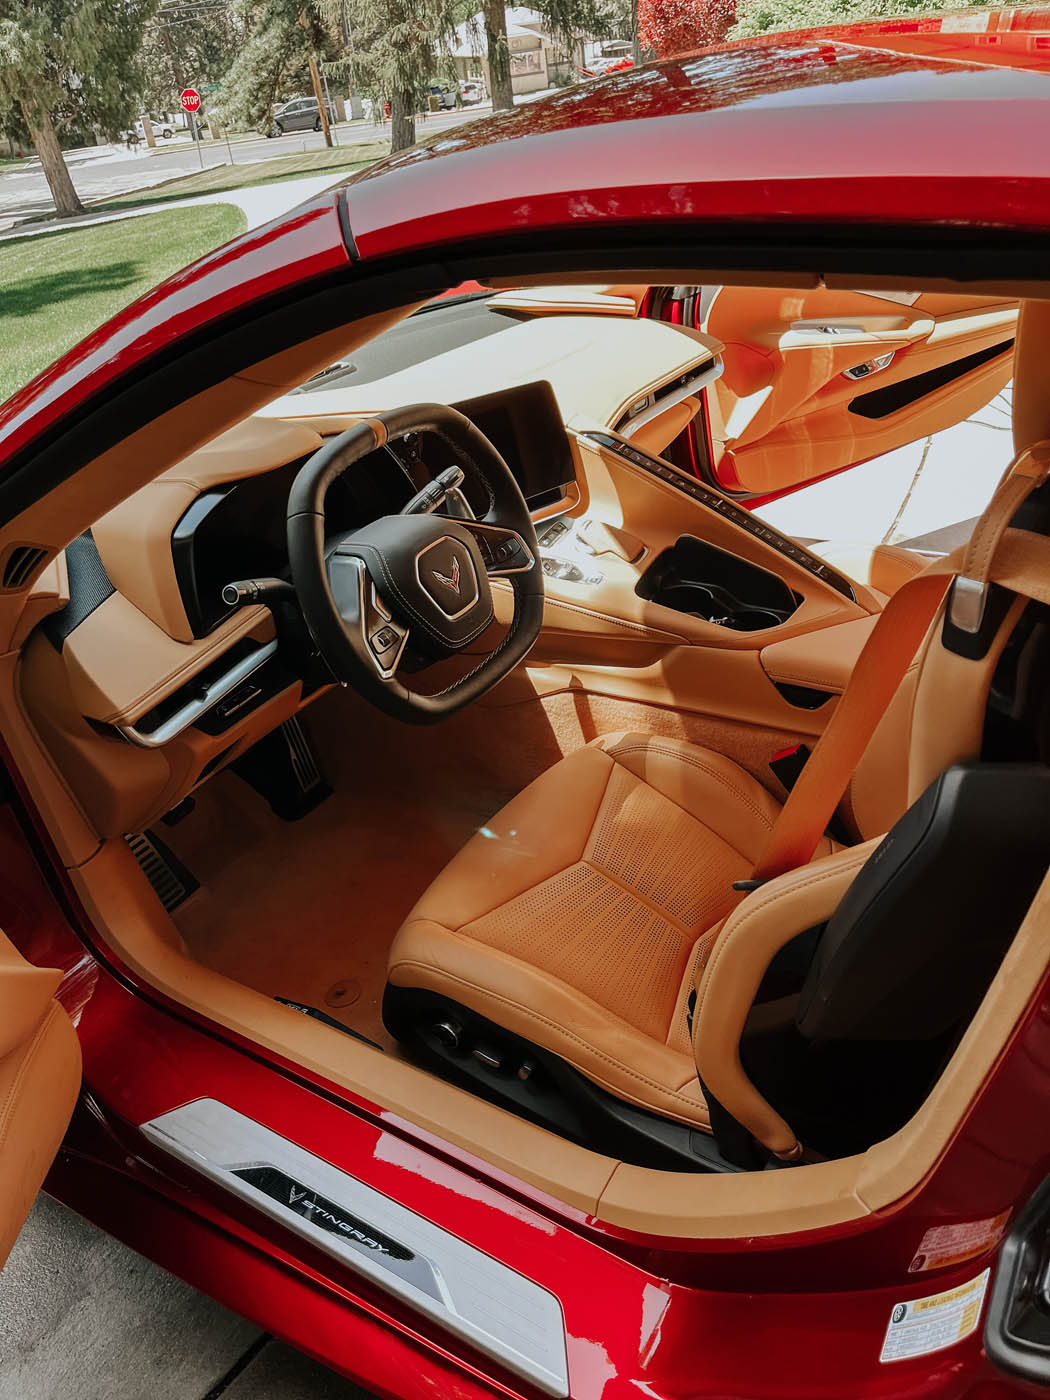 Inside a red corvette, looking fresh and cleaning after Dapper Pros's mobile auto detailing.